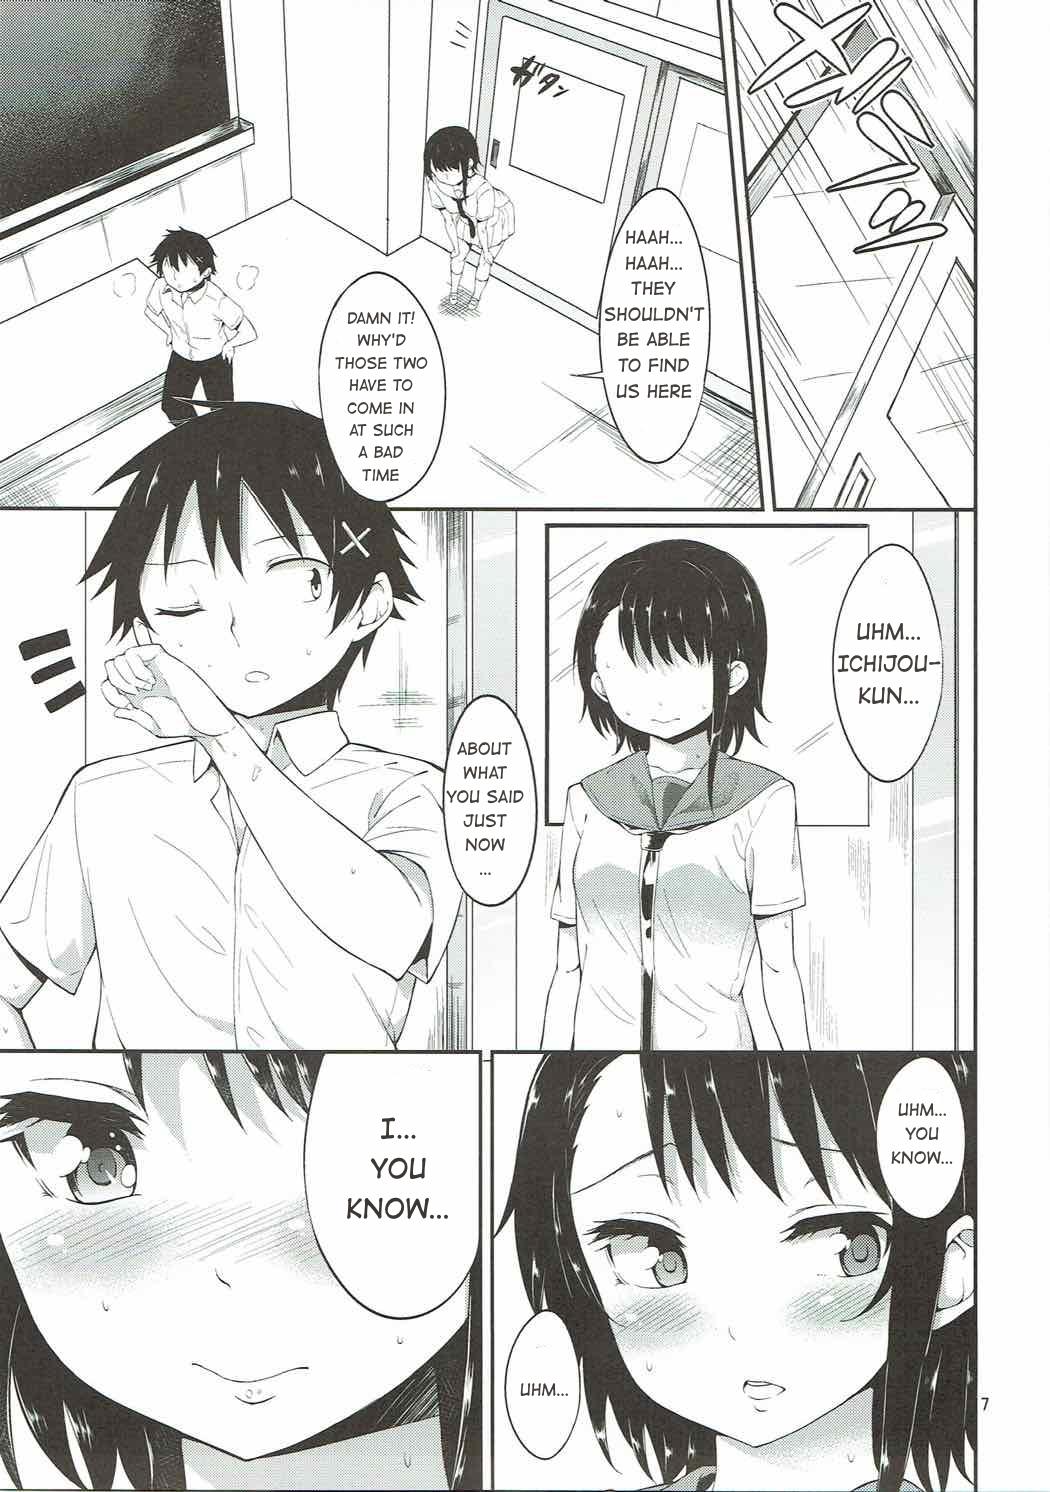 Best Blowjobs Ever Onodera-san to Amai Hi | A sweet day with Onodera - Nisekoi Candid - Page 6